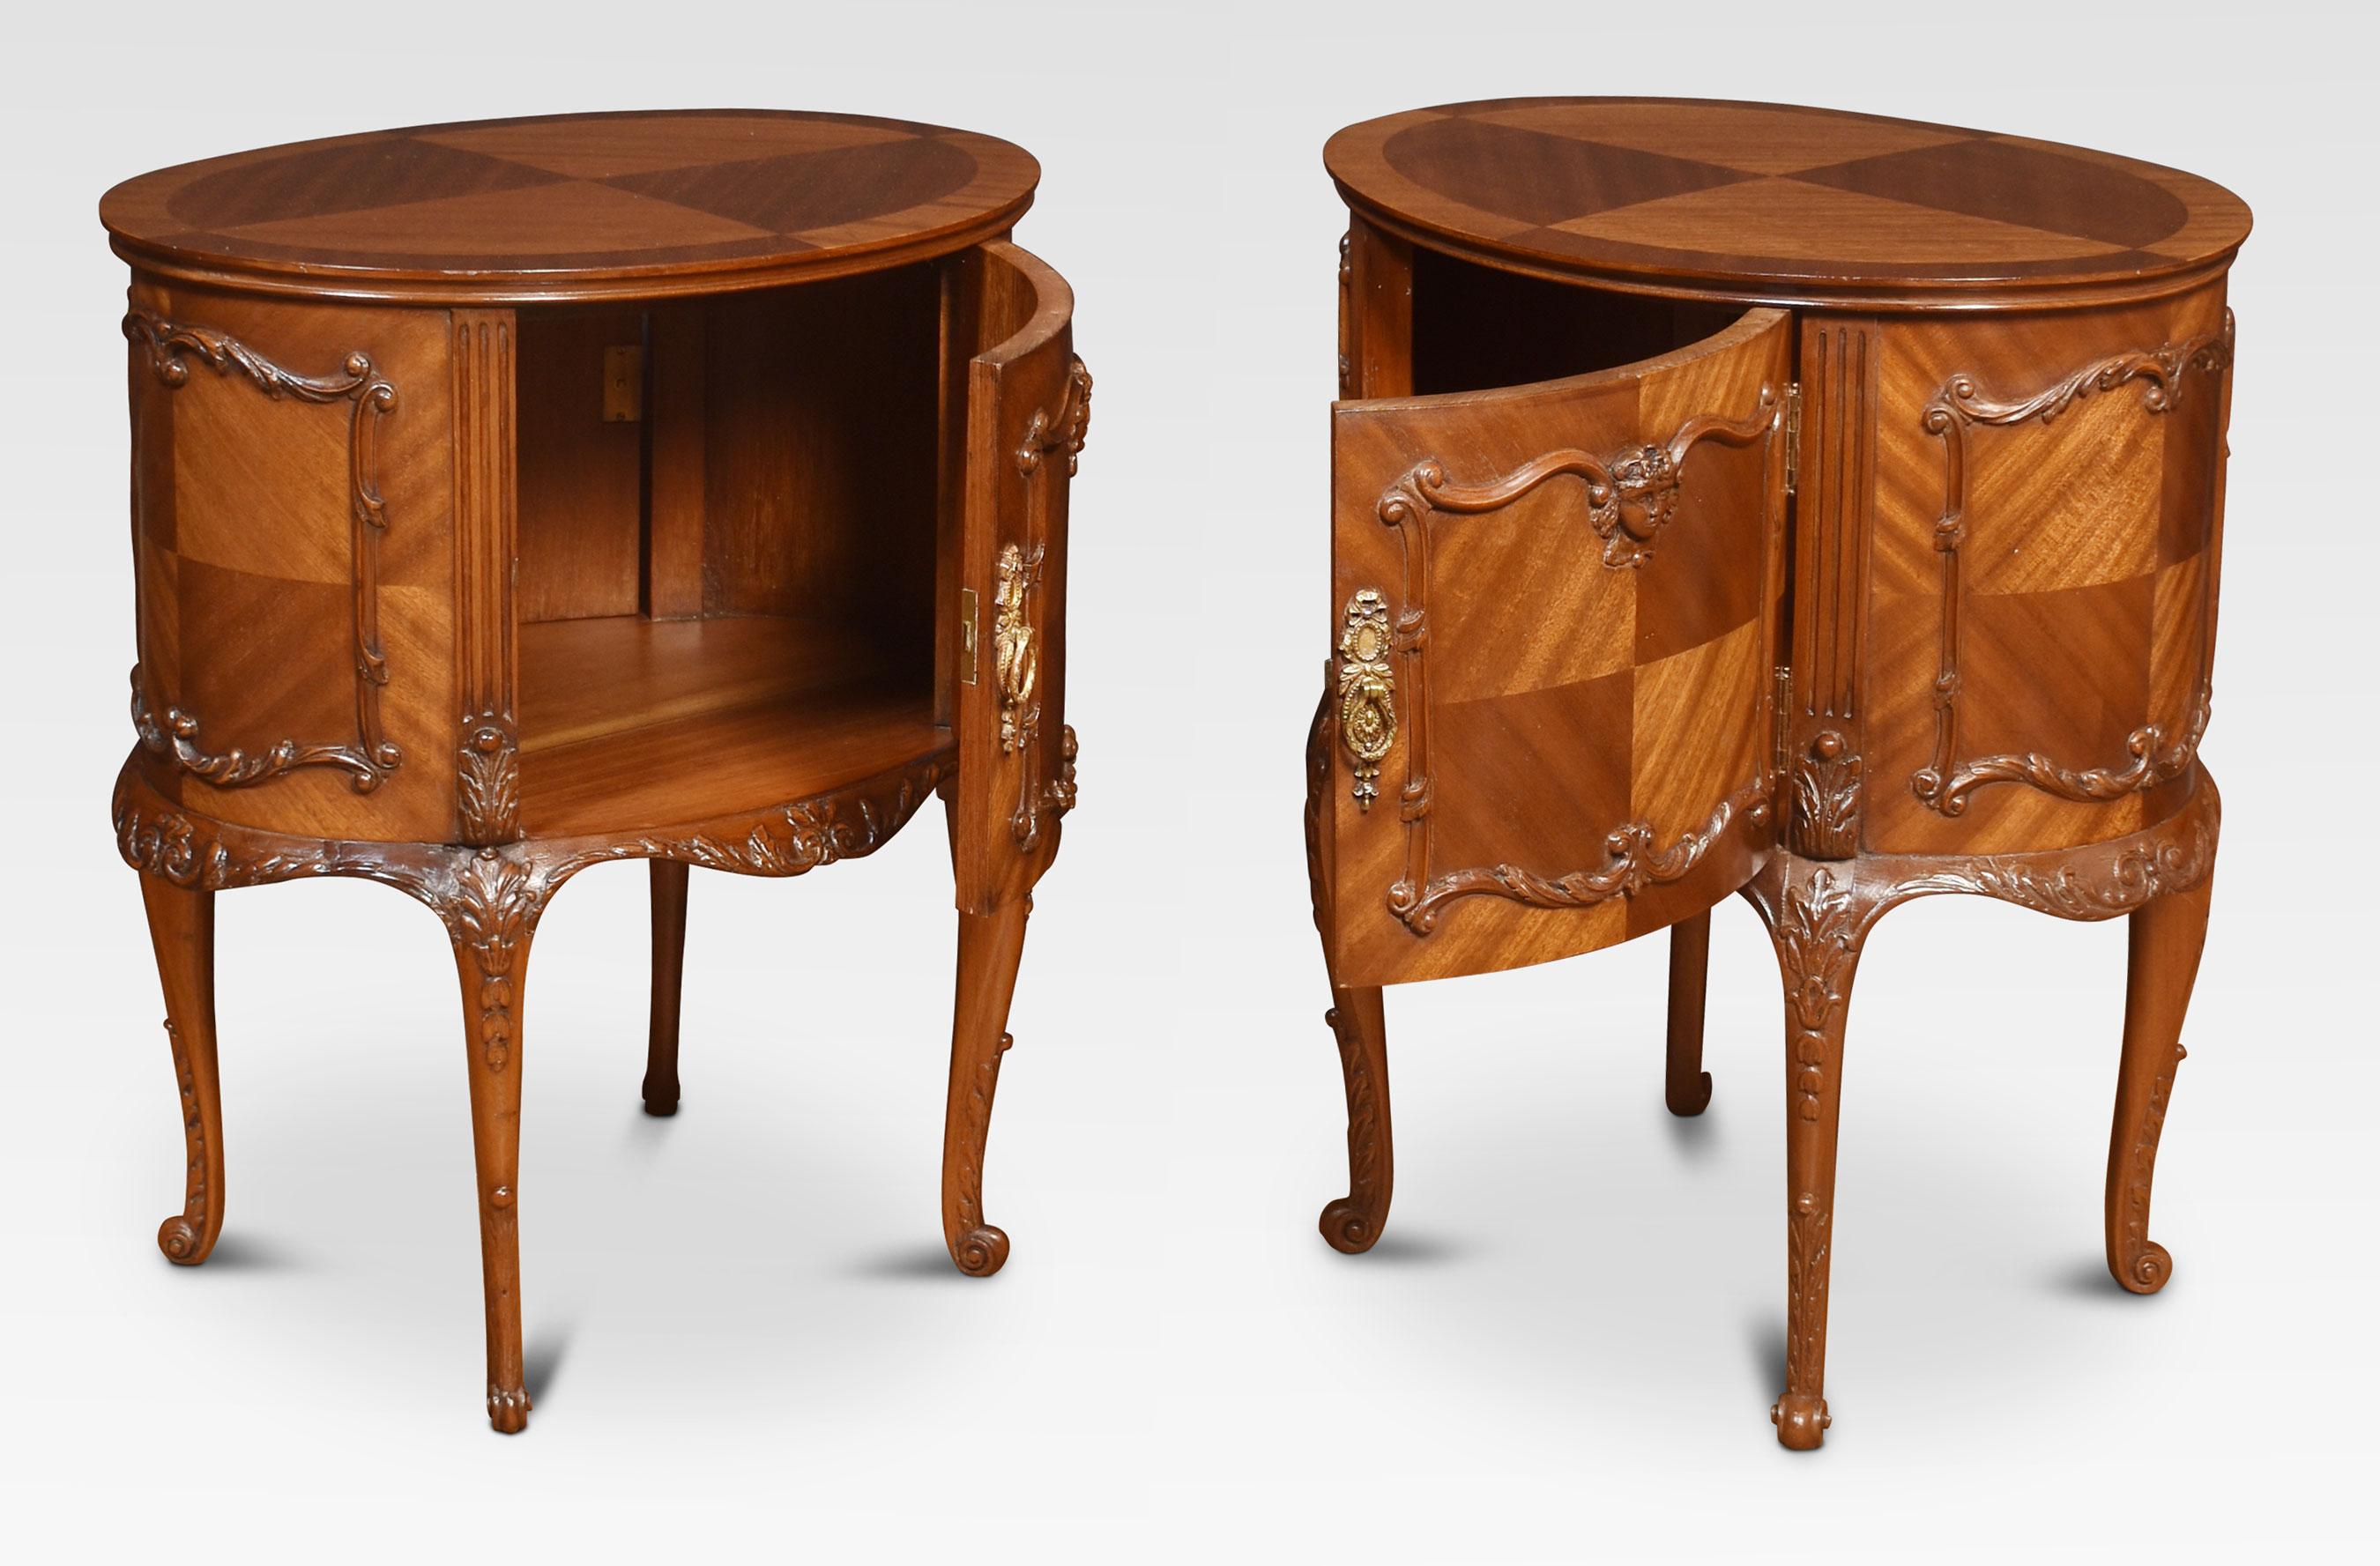 Pair of Louis XV-style oval double-sided night tables/ bedside cupboards, each with quartered and crossbanded tops above doors at opposing sides both with carved and moulded decoration supported on slender cabriole legs terminating in scrolling